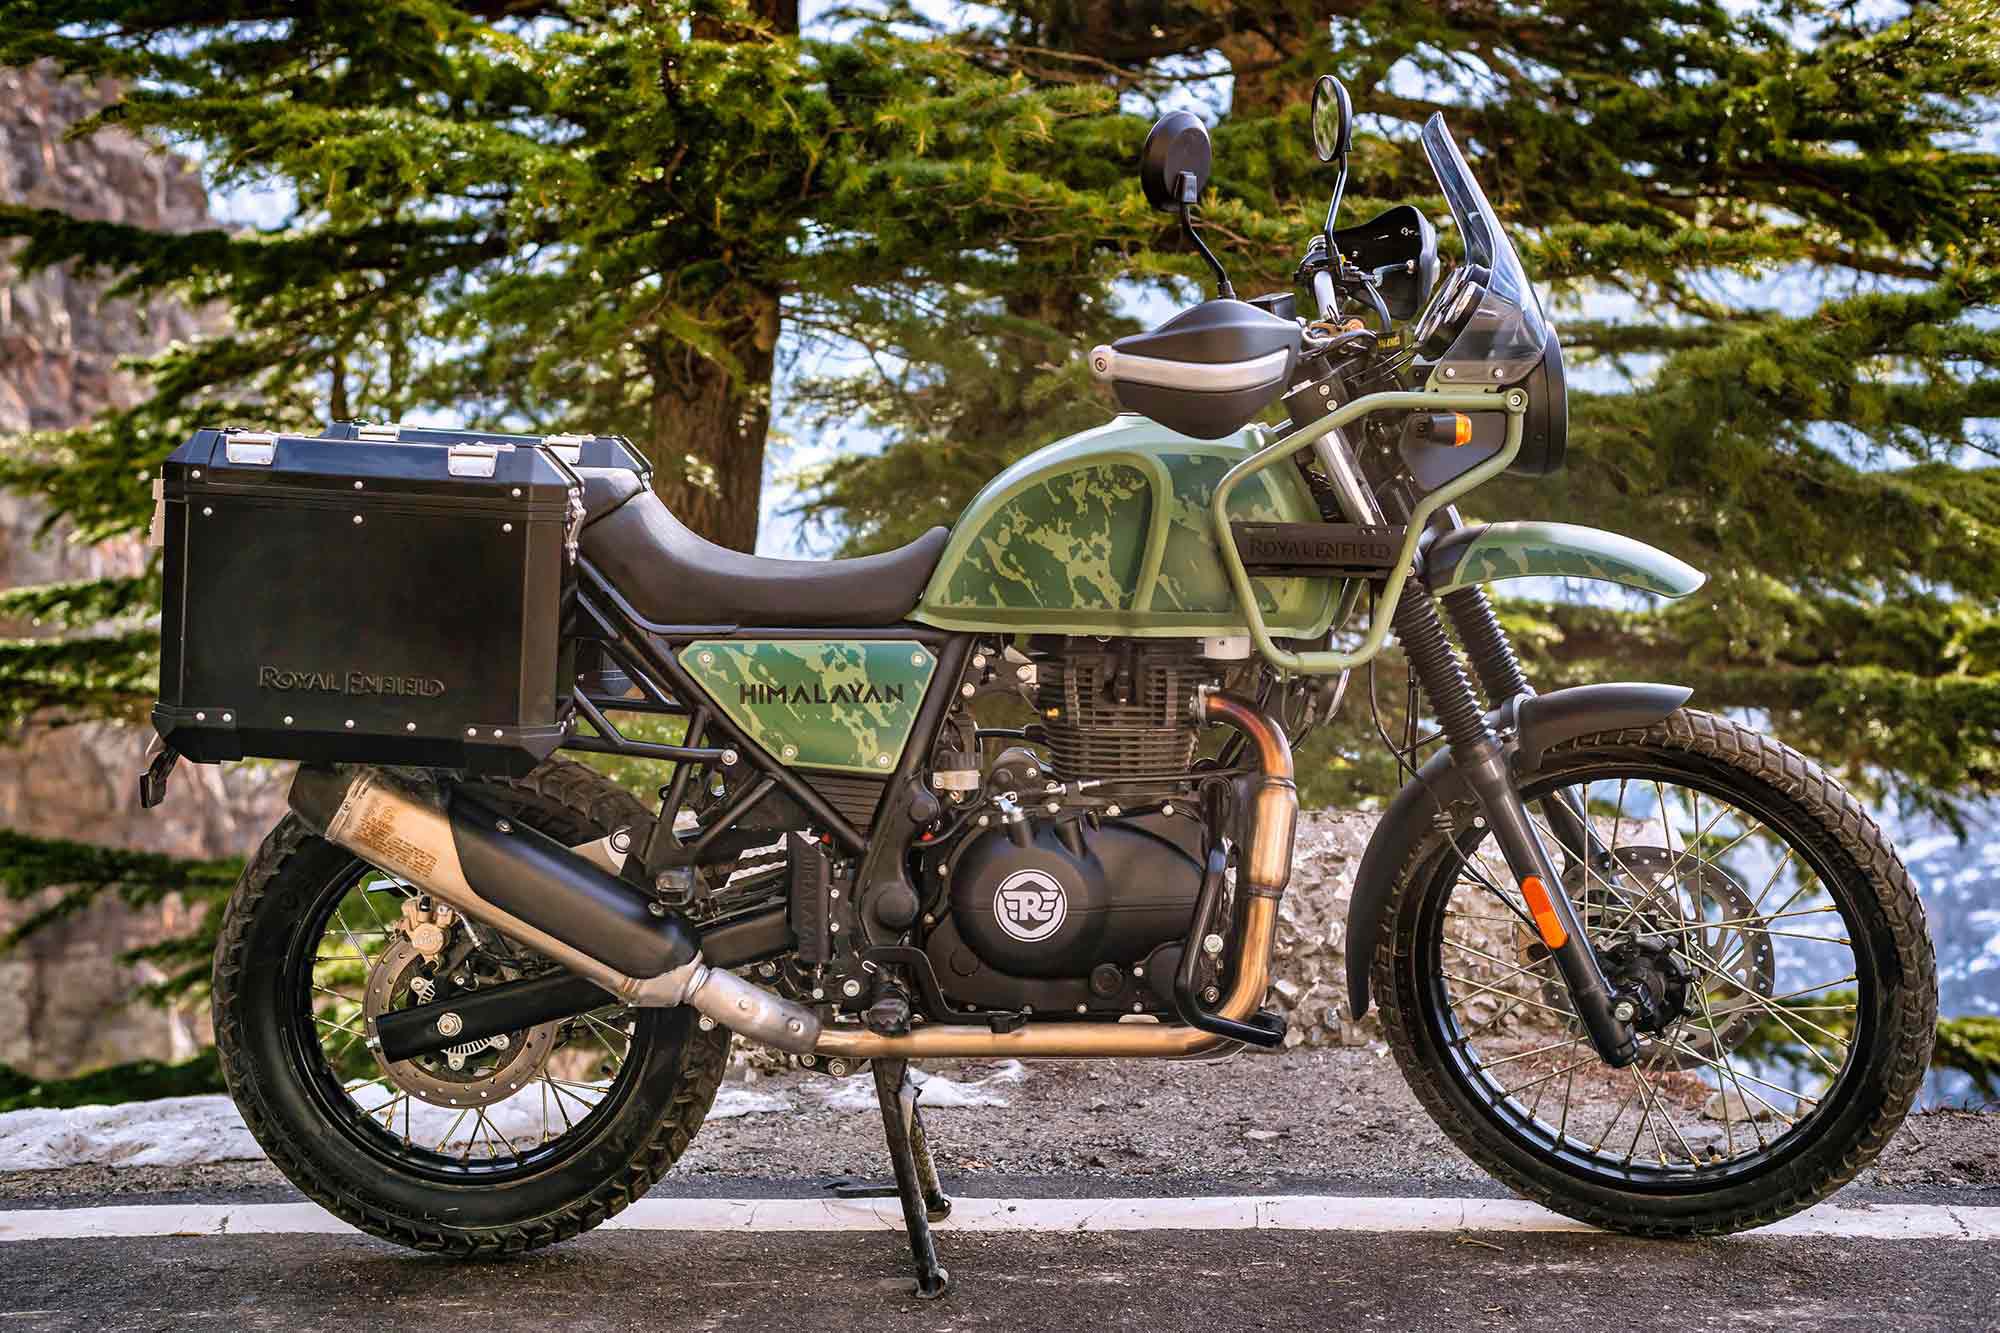 The 2022 Royal Enfield Himalayan in Pine Green colorway.